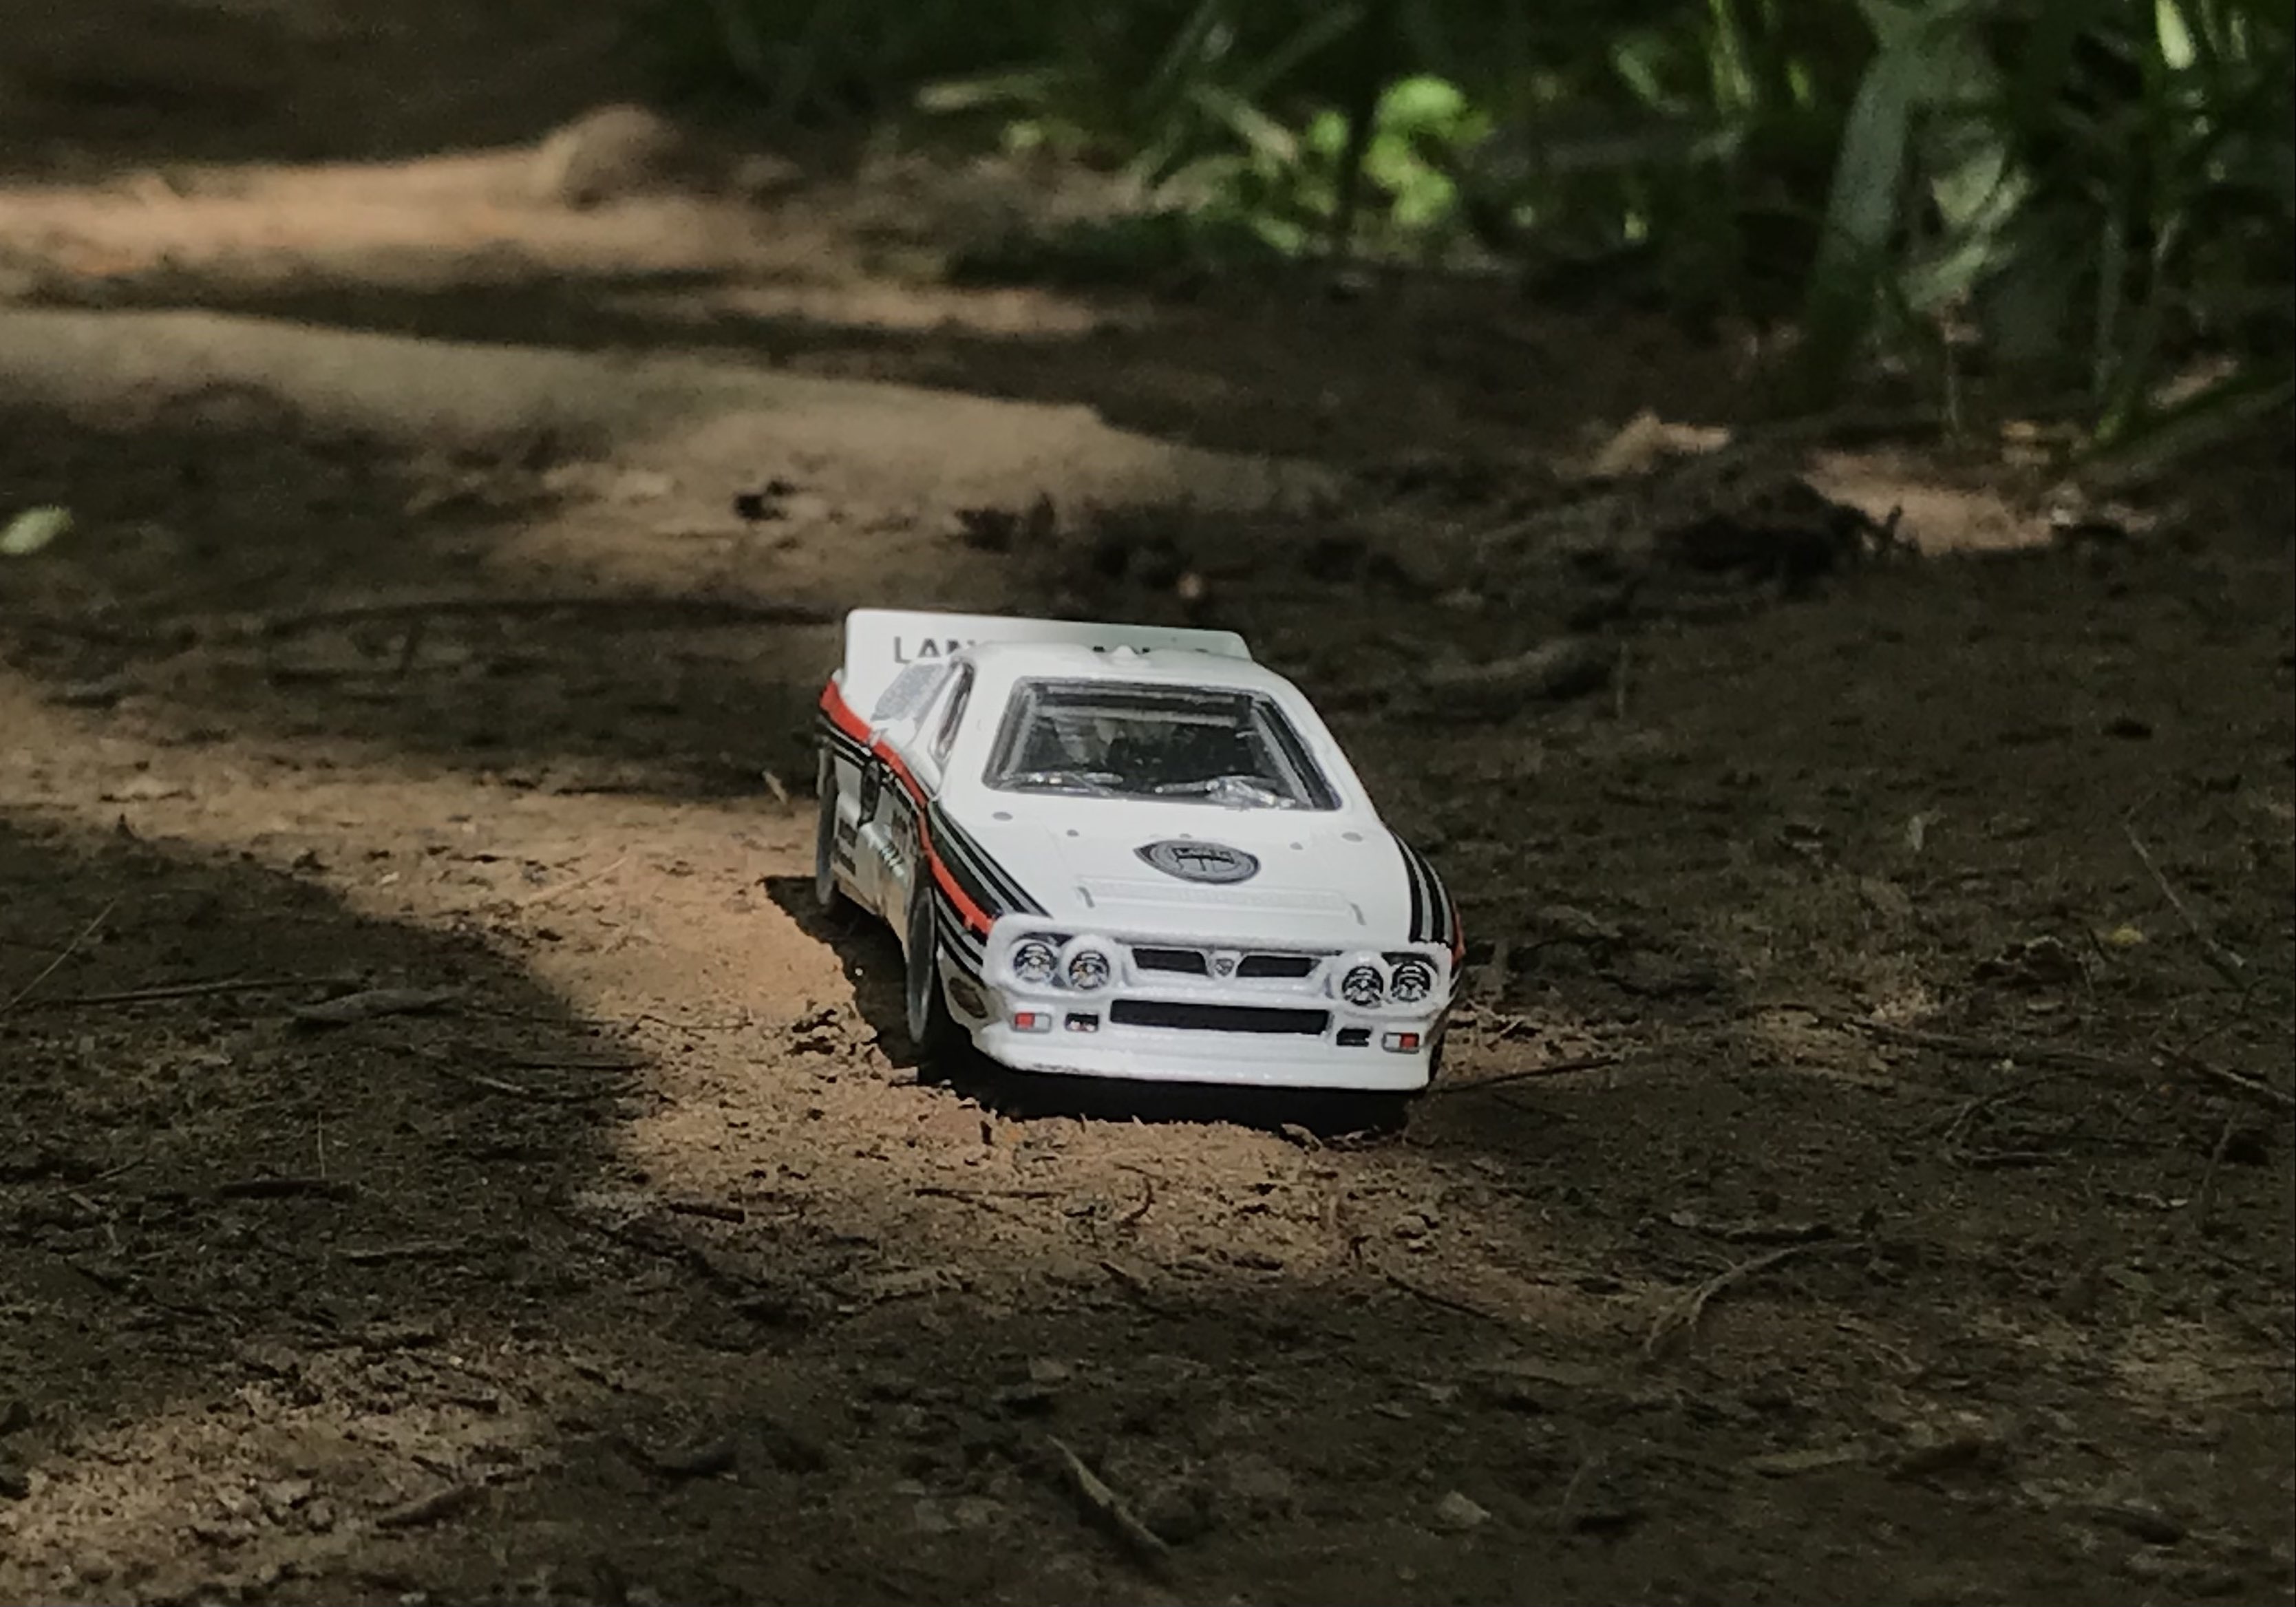 Hotwheels Grp B Rally Lancia 037 on a dirt path, with some grass in the background. The car is illuminated by sunlight, however is surrounded by shadows cast by leaves of trees overhead [World of Tanks - Main Menu 2]